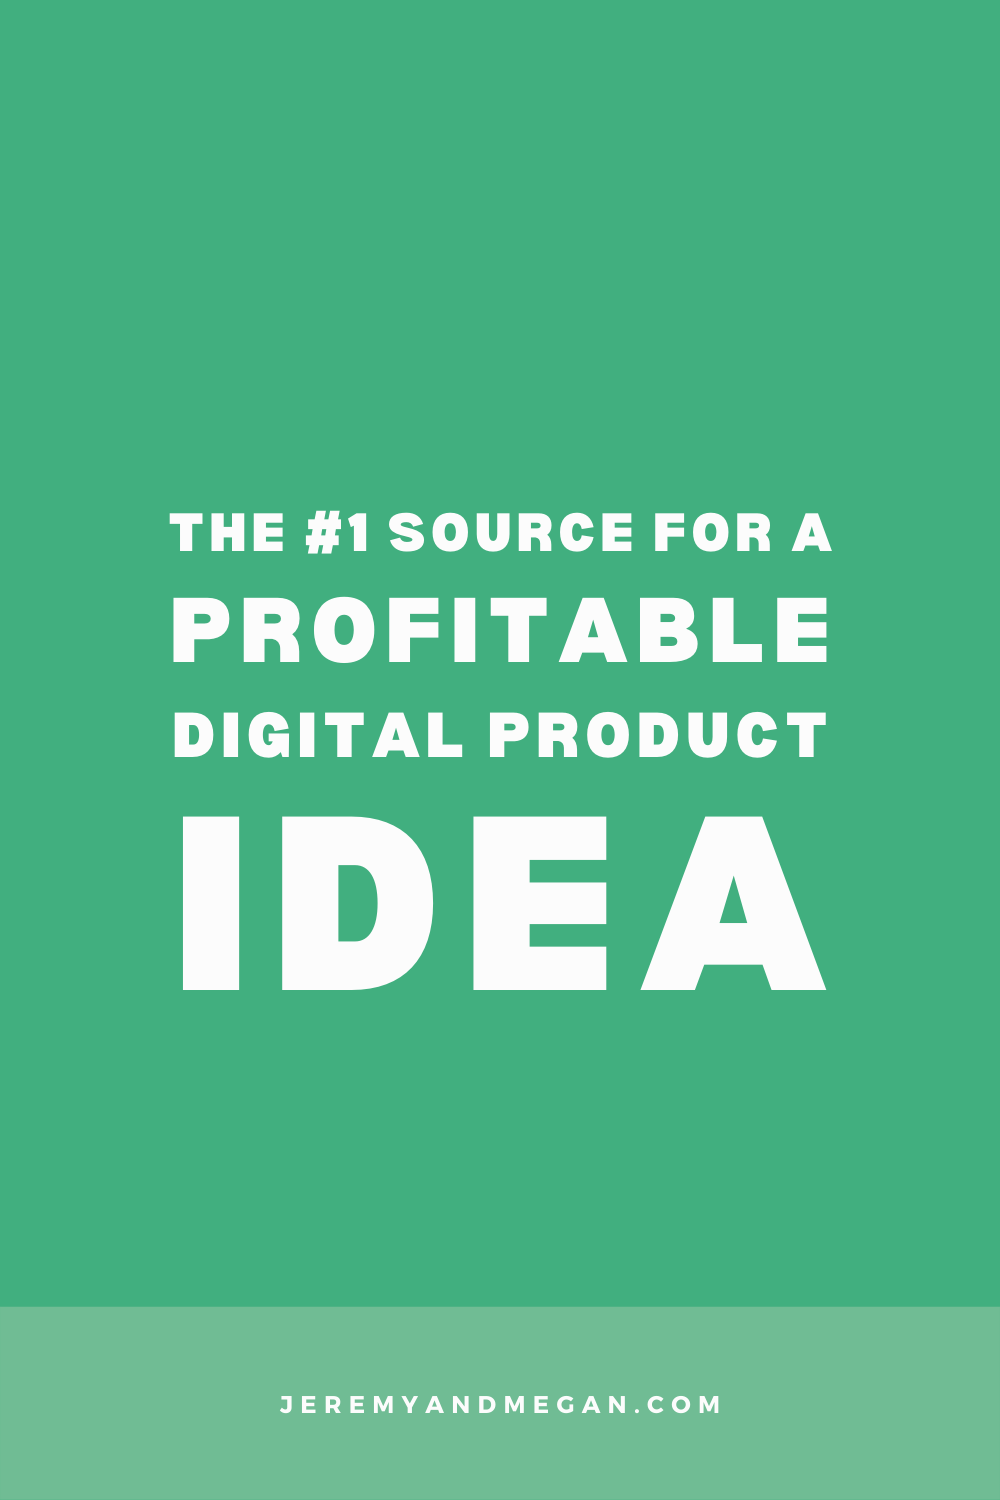 How to turn your service into a profitable digital product idea so you can start earning passive profit